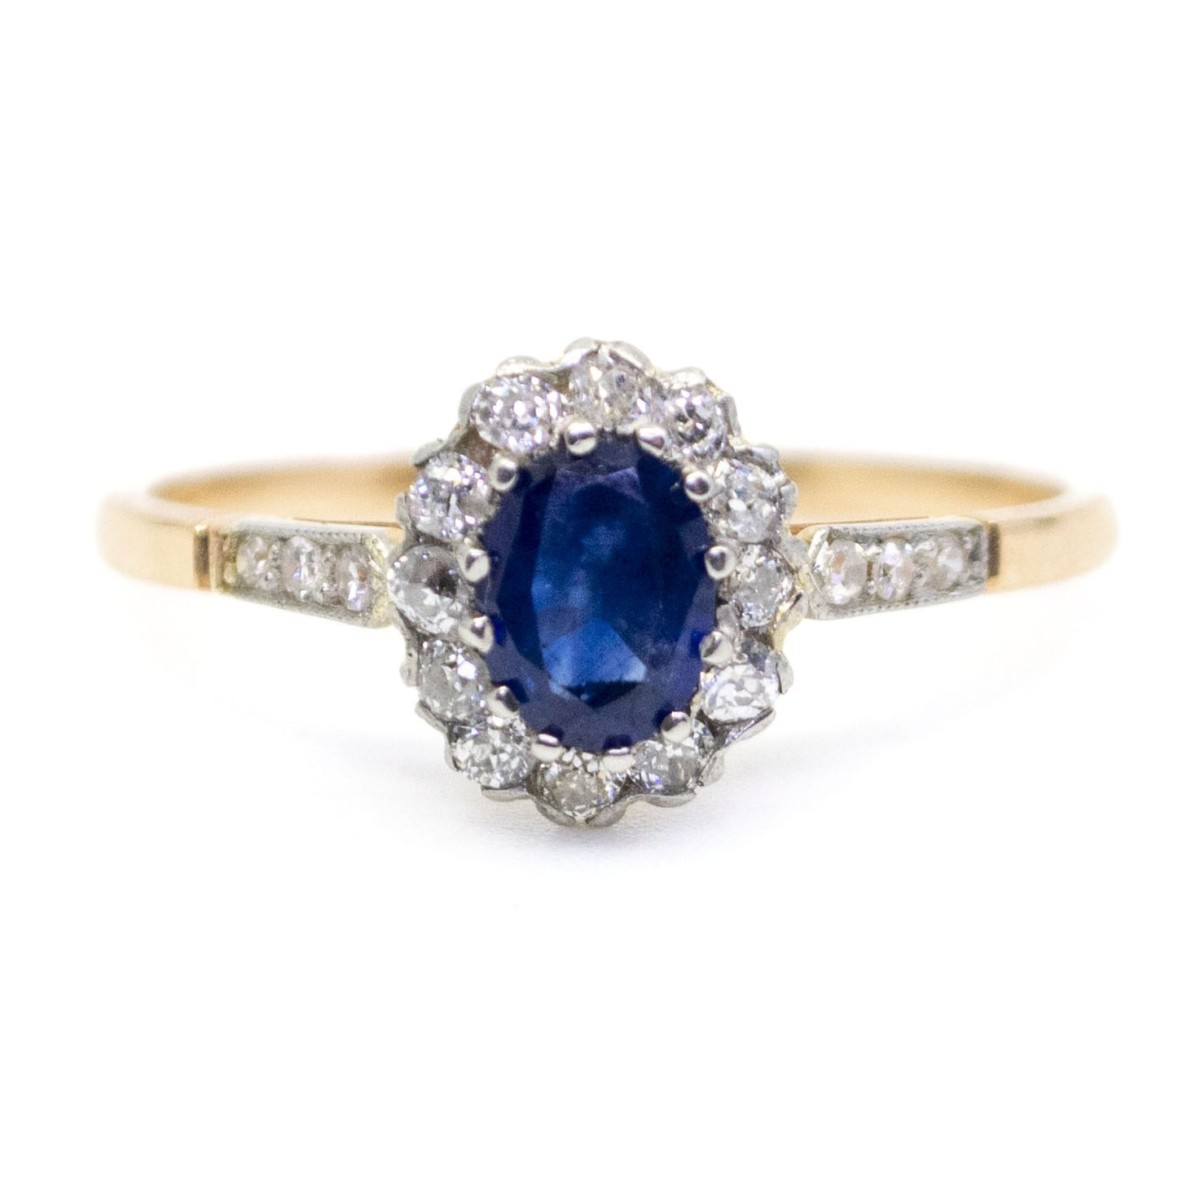 Sapphire Engagement Rings - Jewellery Discovery